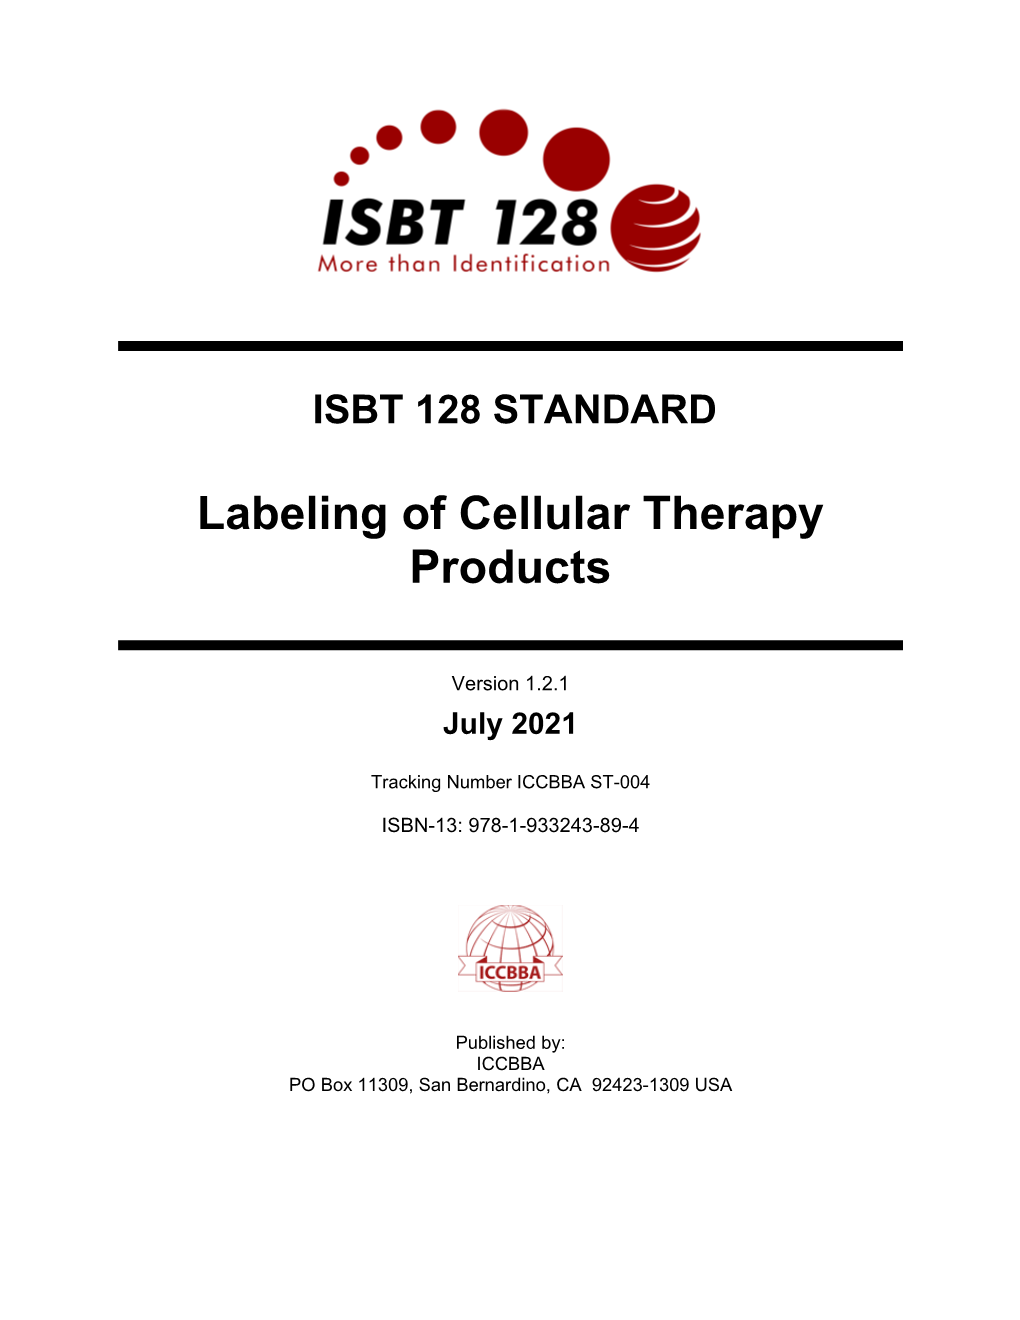 ISBT 128 Standard Labeling of Cellular Therapy Products